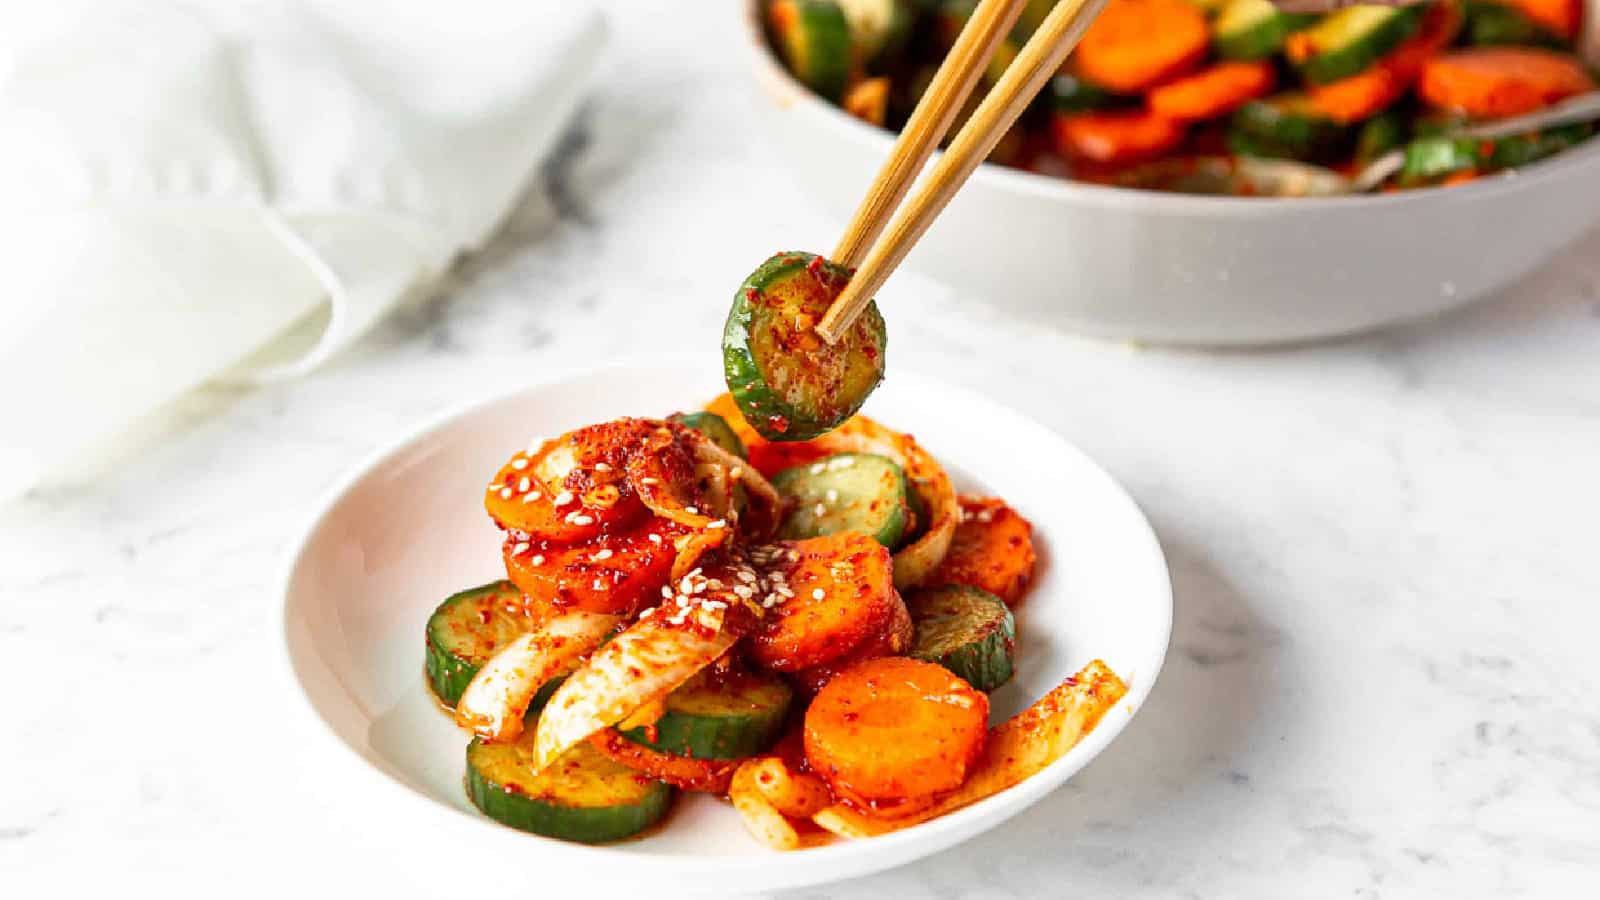 Cucumber kimchi on a white plate with a pair of chopsticks lifting a slice of cucumber.